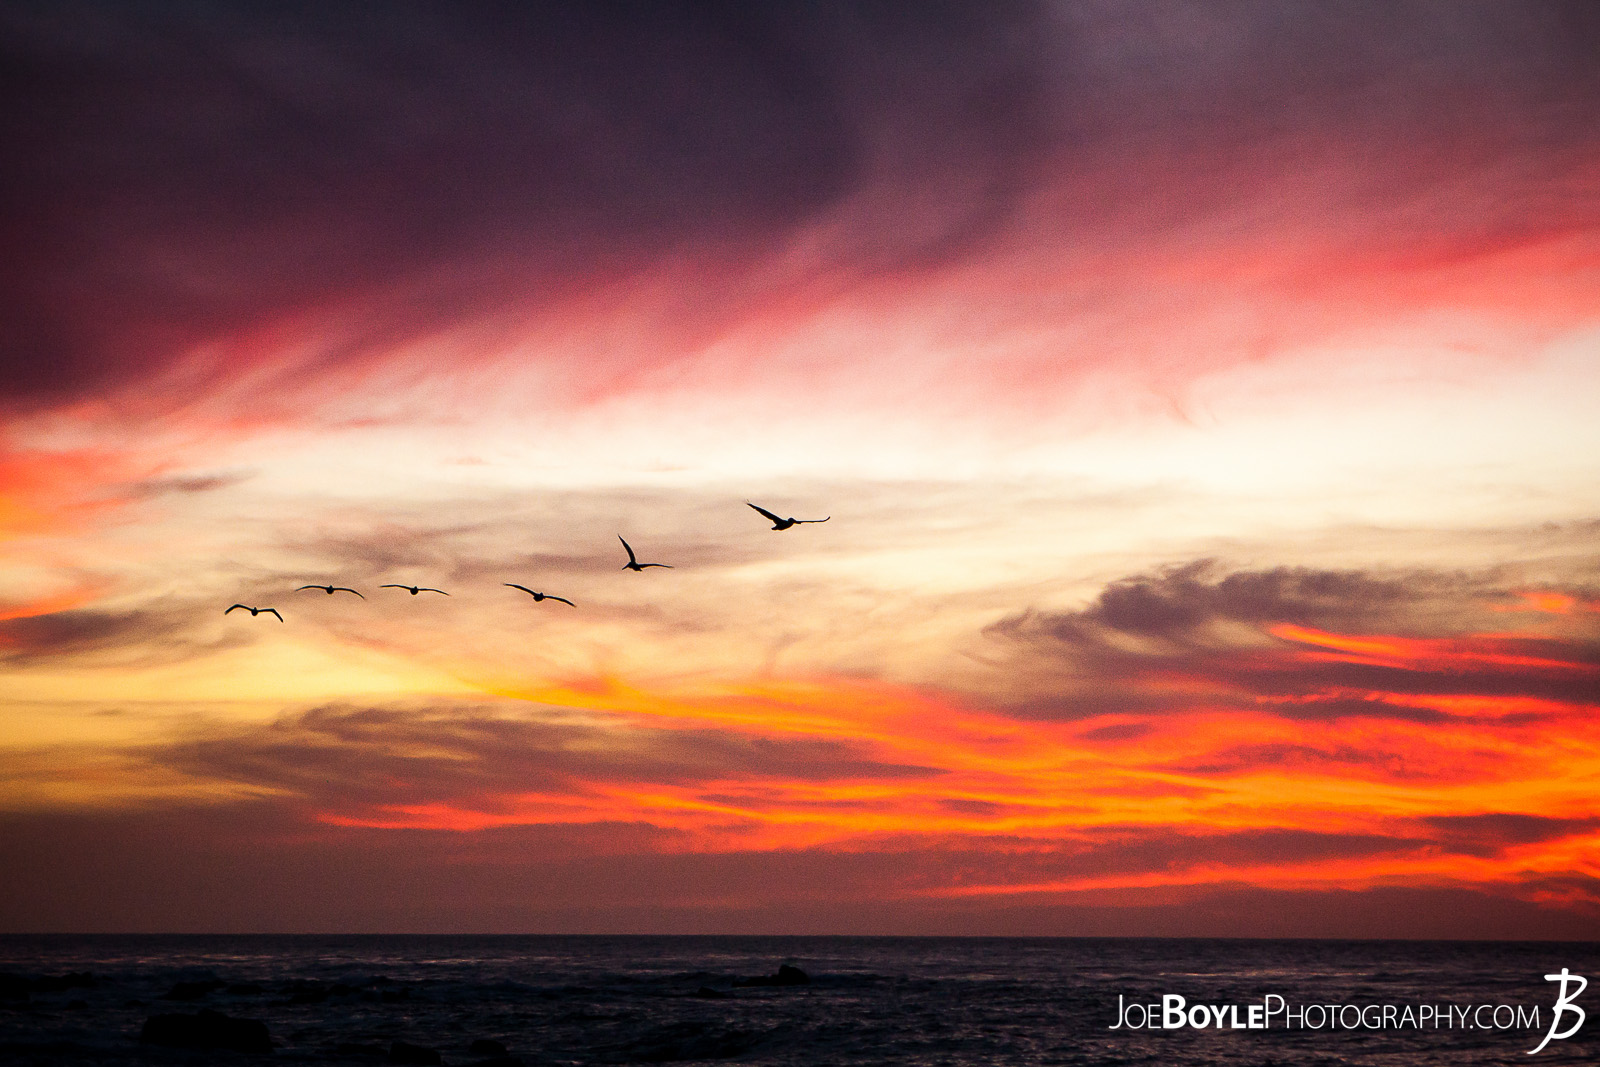  When I was traveling to Monterey, California I spent a lot of time walking around the city, Pacific Grove and the sand dunes in the area. Here is a shot of a flock of herons flying in the sunset! 